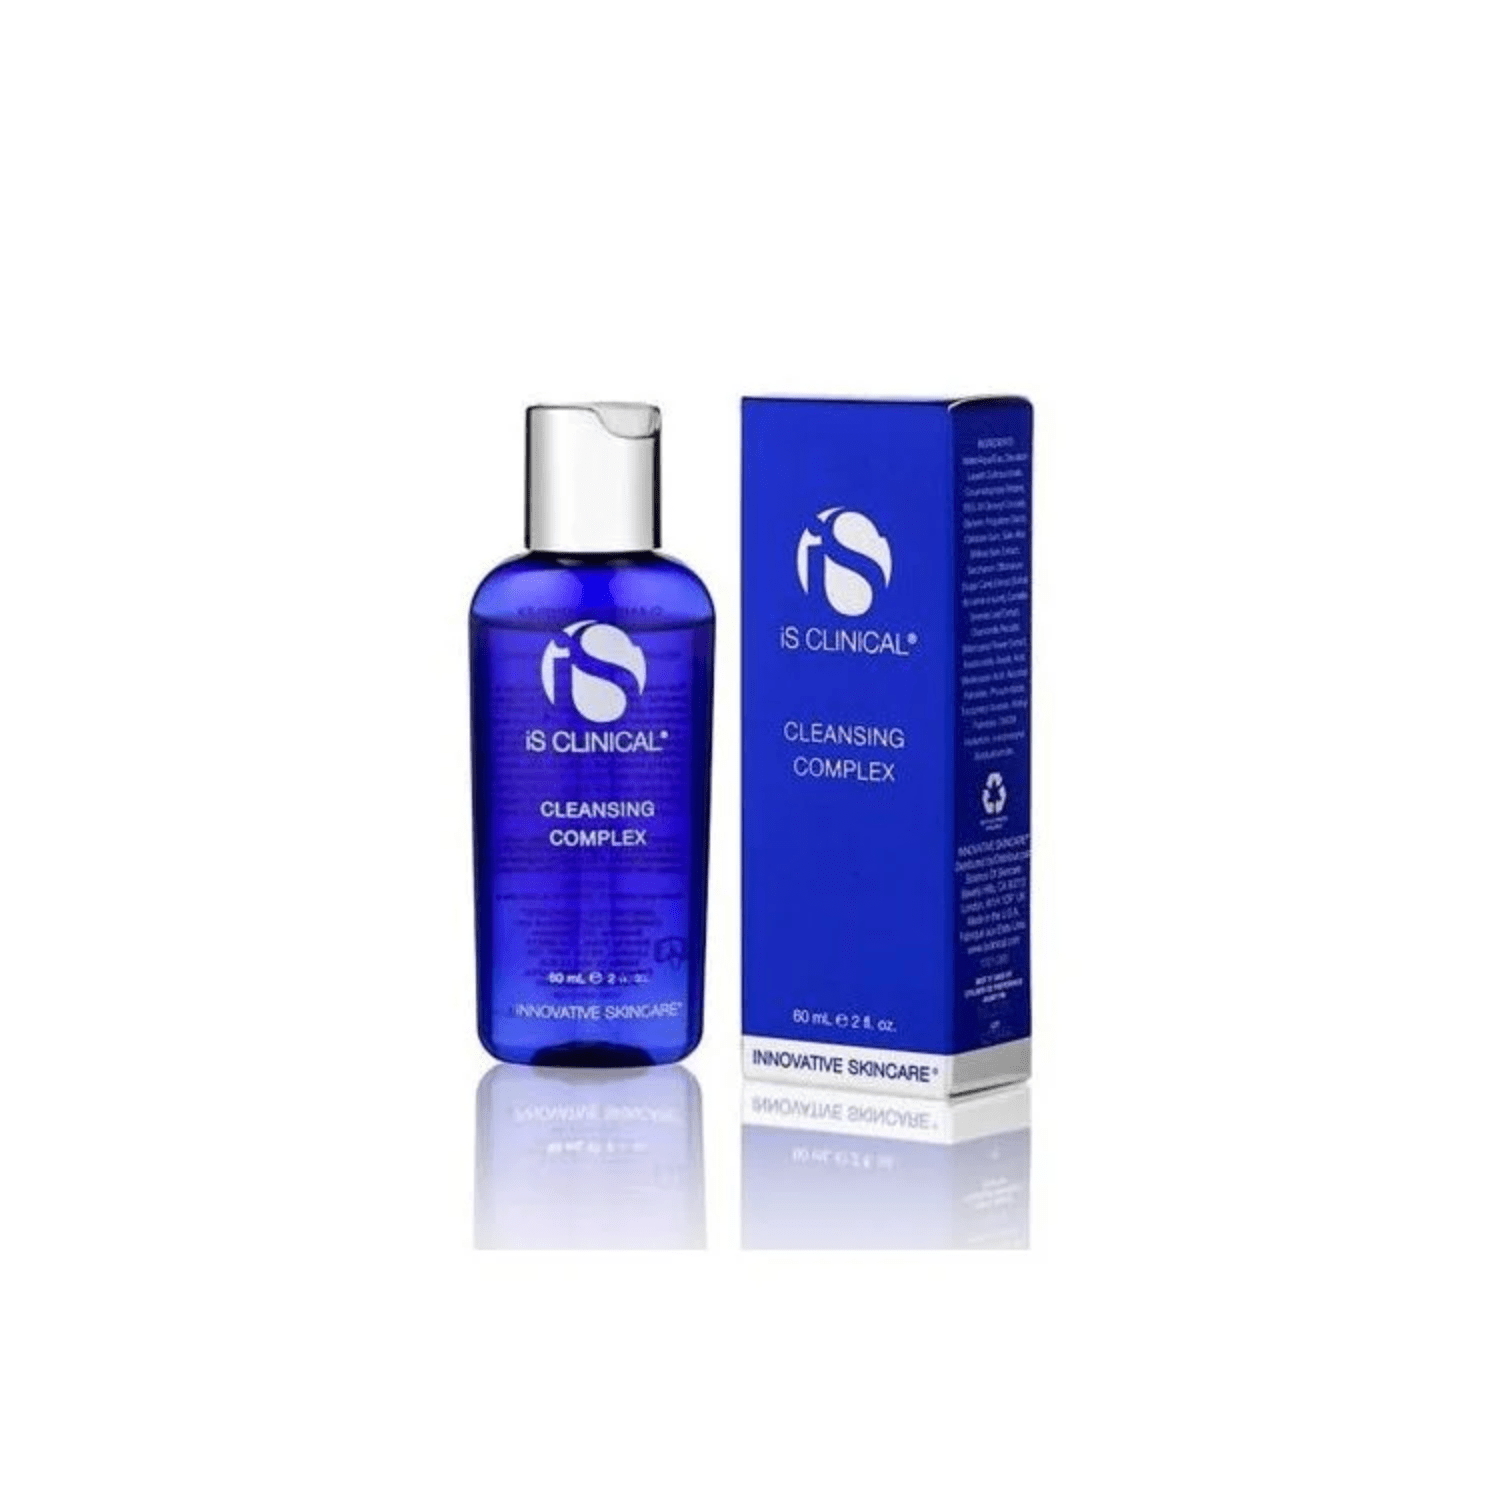 iS Clinical 60mL Cleansing Complex